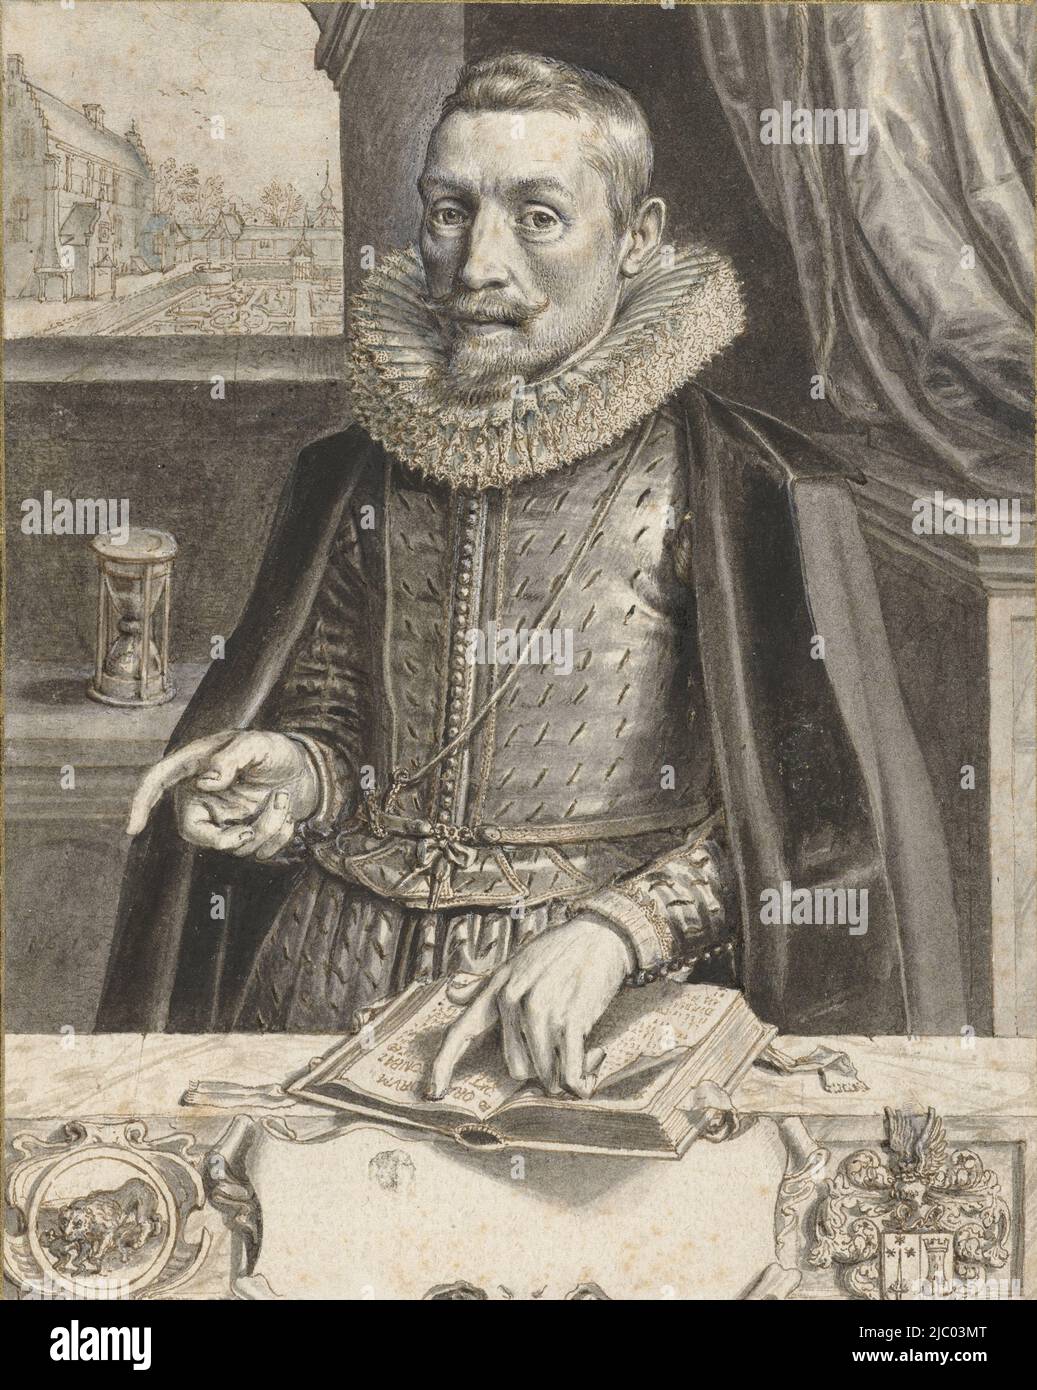 Portrait of Jacob Cats, Adriaen Pietersz van de Venne, 1618, Portrait of Jacob Cats (1577-1660), seated at a table, pointing to a book lying before him. In the back left, on a windowsill, an hourglass. Through the window on the left, the Munnikenhof near Grijpskerke can be seen, Cats's country residence in the years 1603-1623. Presumably this is the earliest known portrait of the poet-statesman. That the drawing was certainly intended to be printed can be deduced from the fact that Cats's family coat of arms is depicted mirrorwise at the bottom right. Design for a print., draughtsman: Adriaen Stock Photo